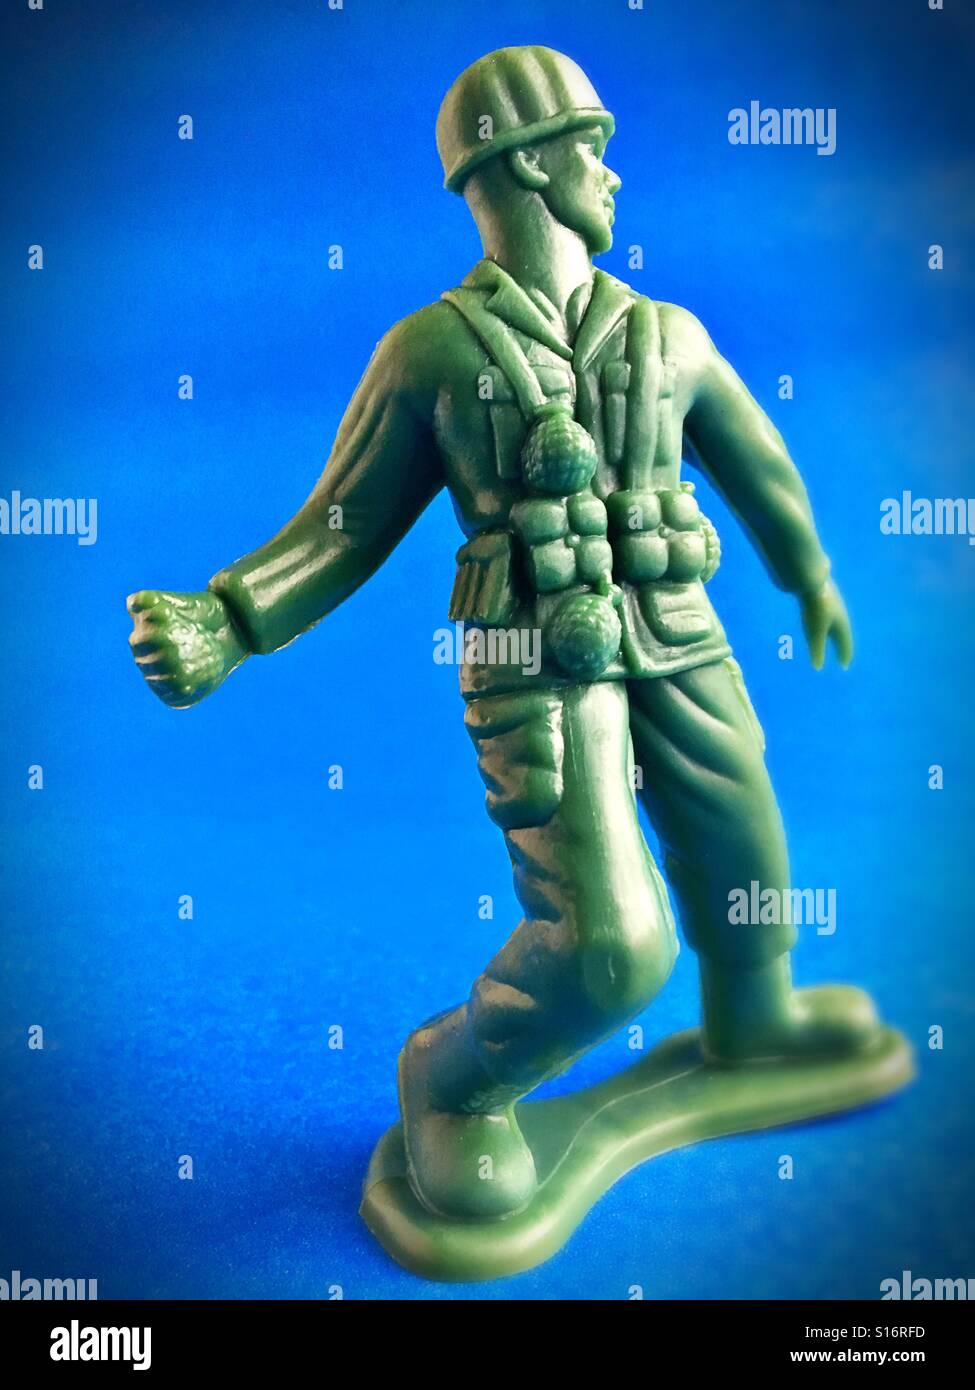 A toy soldier holding a hand grenade. Stock Photo